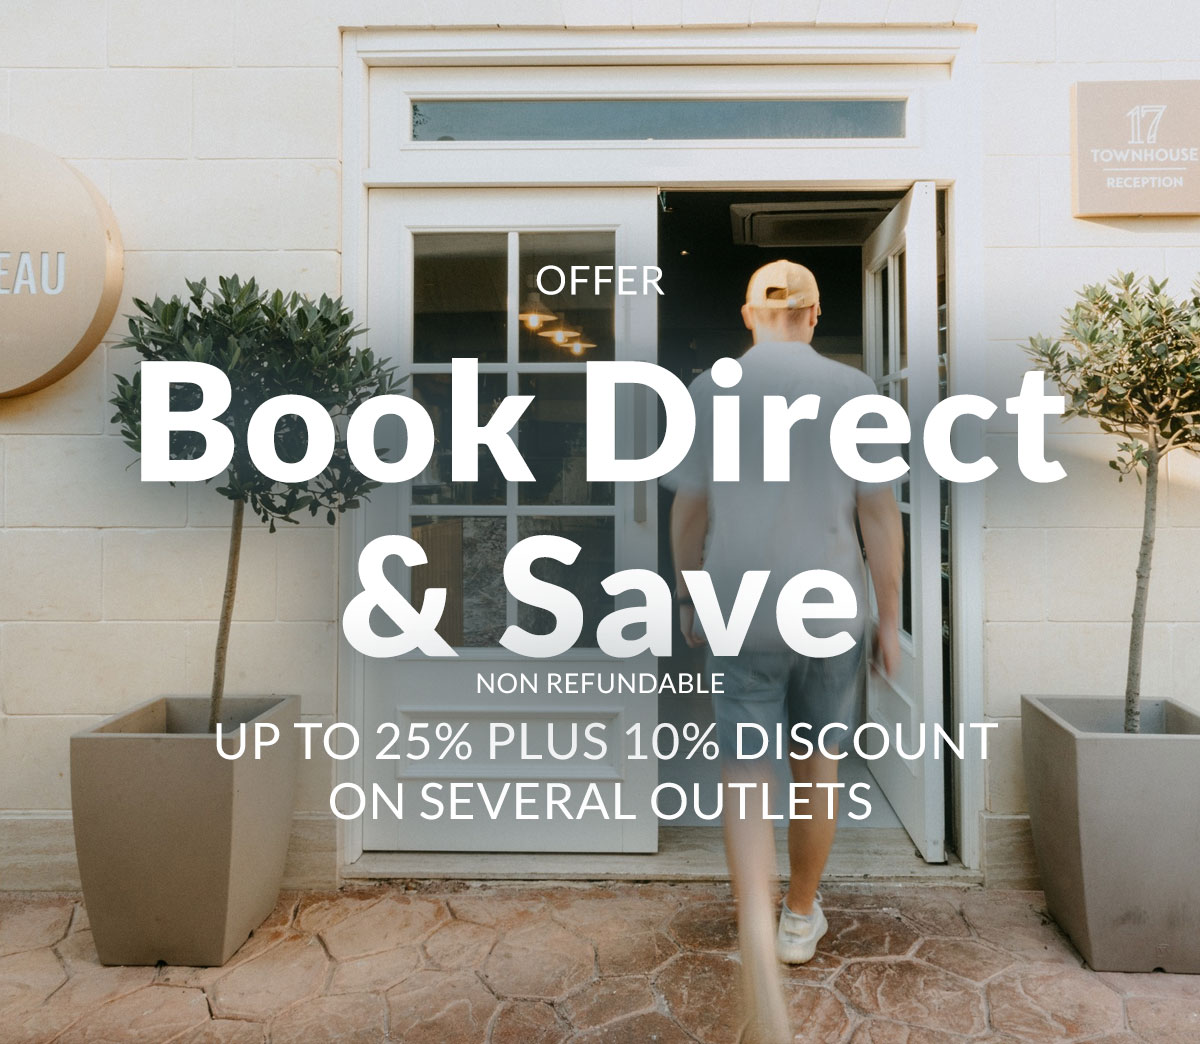 Offer Book Direct